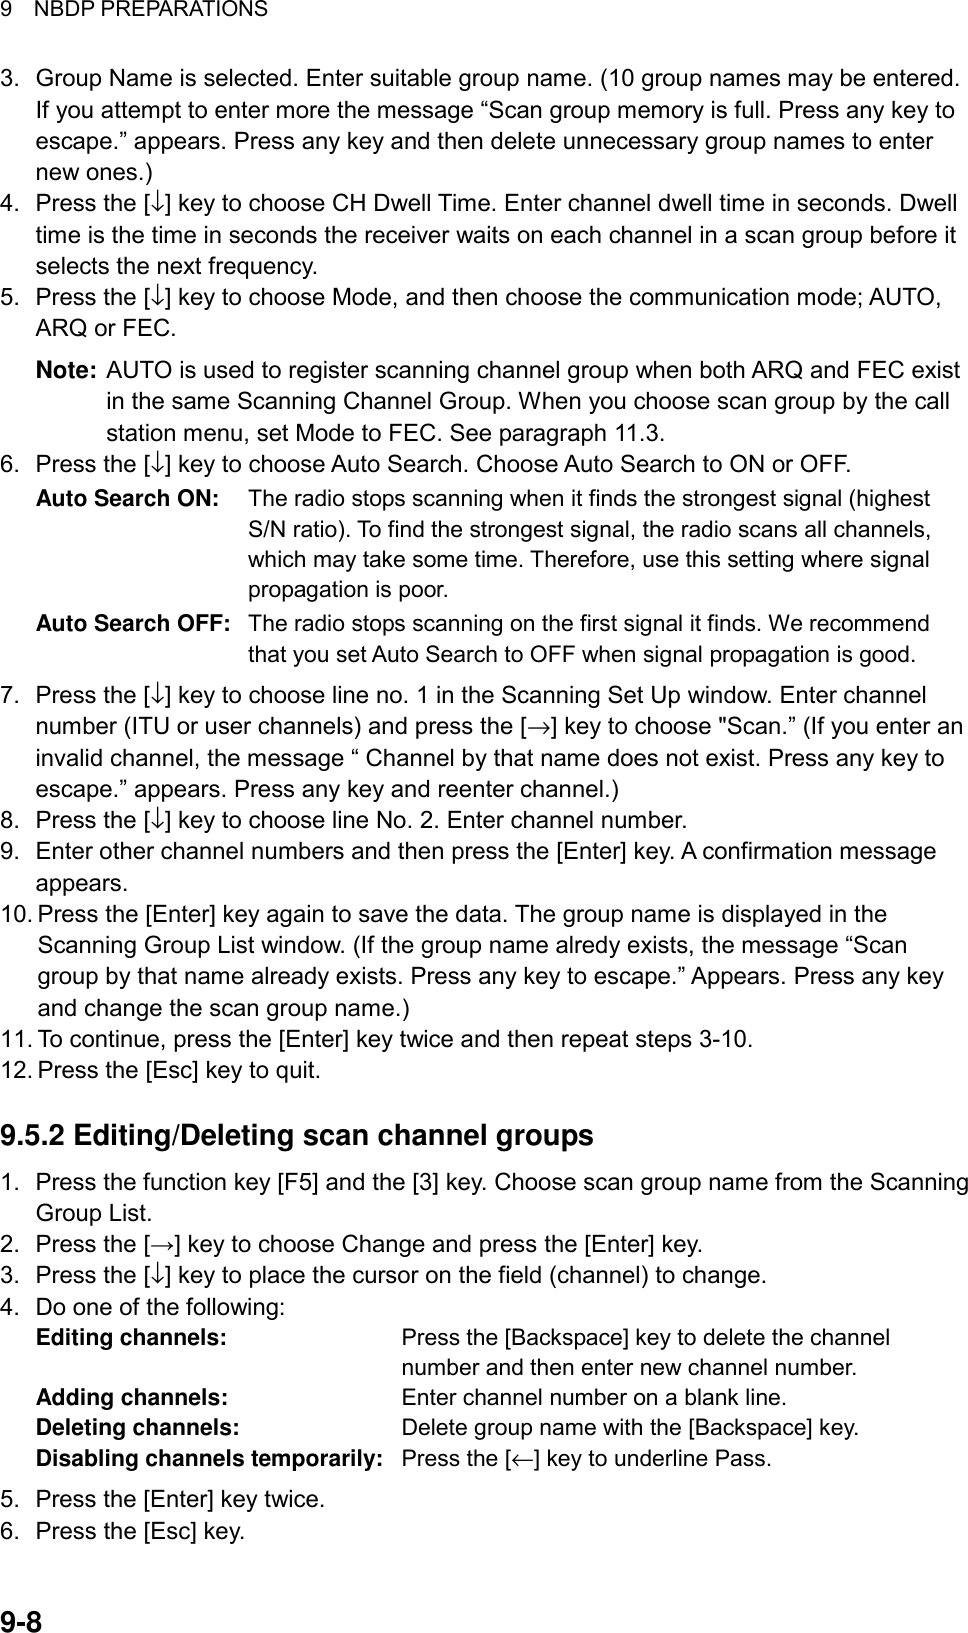 9  NBDP PREPARATIONS 9-8 3.  Group Name is selected. Enter suitable group name. (10 group names may be entered. If you attempt to enter more the message “Scan group memory is full. Press any key to escape.” appears. Press any key and then delete unnecessary group names to enter new ones.)   4.  Press the [↓] key to choose CH Dwell Time. Enter channel dwell time in seconds. Dwell time is the time in seconds the receiver waits on each channel in a scan group before it selects the next frequency. 5.  Press the [↓] key to choose Mode, and then choose the communication mode; AUTO, ARQ or FEC. Note:  AUTO is used to register scanning channel group when both ARQ and FEC exist in the same Scanning Channel Group. When you choose scan group by the call station menu, set Mode to FEC. See paragraph 11.3. 6.  Press the [↓] key to choose Auto Search. Choose Auto Search to ON or OFF. Auto Search ON:  The radio stops scanning when it finds the strongest signal (highest S/N ratio). To find the strongest signal, the radio scans all channels, which may take some time. Therefore, use this setting where signal propagation is poor. Auto Search OFF:  The radio stops scanning on the first signal it finds. We recommend that you set Auto Search to OFF when signal propagation is good. 7.  Press the [↓] key to choose line no. 1 in the Scanning Set Up window. Enter channel number (ITU or user channels) and press the [→] key to choose &quot;Scan.” (If you enter an invalid channel, the message “ Channel by that name does not exist. Press any key to escape.” appears. Press any key and reenter channel.) 8.  Press the [↓] key to choose line No. 2. Enter channel number.   9.  Enter other channel numbers and then press the [Enter] key. A confirmation message appears. 10. Press the [Enter] key again to save the data. The group name is displayed in the Scanning Group List window. (If the group name alredy exists, the message “Scan group by that name already exists. Press any key to escape.” Appears. Press any key and change the scan group name.) 11. To continue, press the [Enter] key twice and then repeat steps 3-10. 12. Press the [Esc] key to quit.  9.5.2 Editing/Deleting scan channel groups 1.  Press the function key [F5] and the [3] key. Choose scan group name from the Scanning Group List. 2.  Press the [→] key to choose Change and press the [Enter] key. 3.  Press the [↓] key to place the cursor on the field (channel) to change. 4.  Do one of the following: Editing channels:  Press the [Backspace] key to delete the channel number and then enter new channel number. Adding channels:  Enter channel number on a blank line. Deleting channels:  Delete group name with the [Backspace] key. Disabling channels temporarily:  Press the [←] key to underline Pass. 5.  Press the [Enter] key twice. 6.  Press the [Esc] key. 